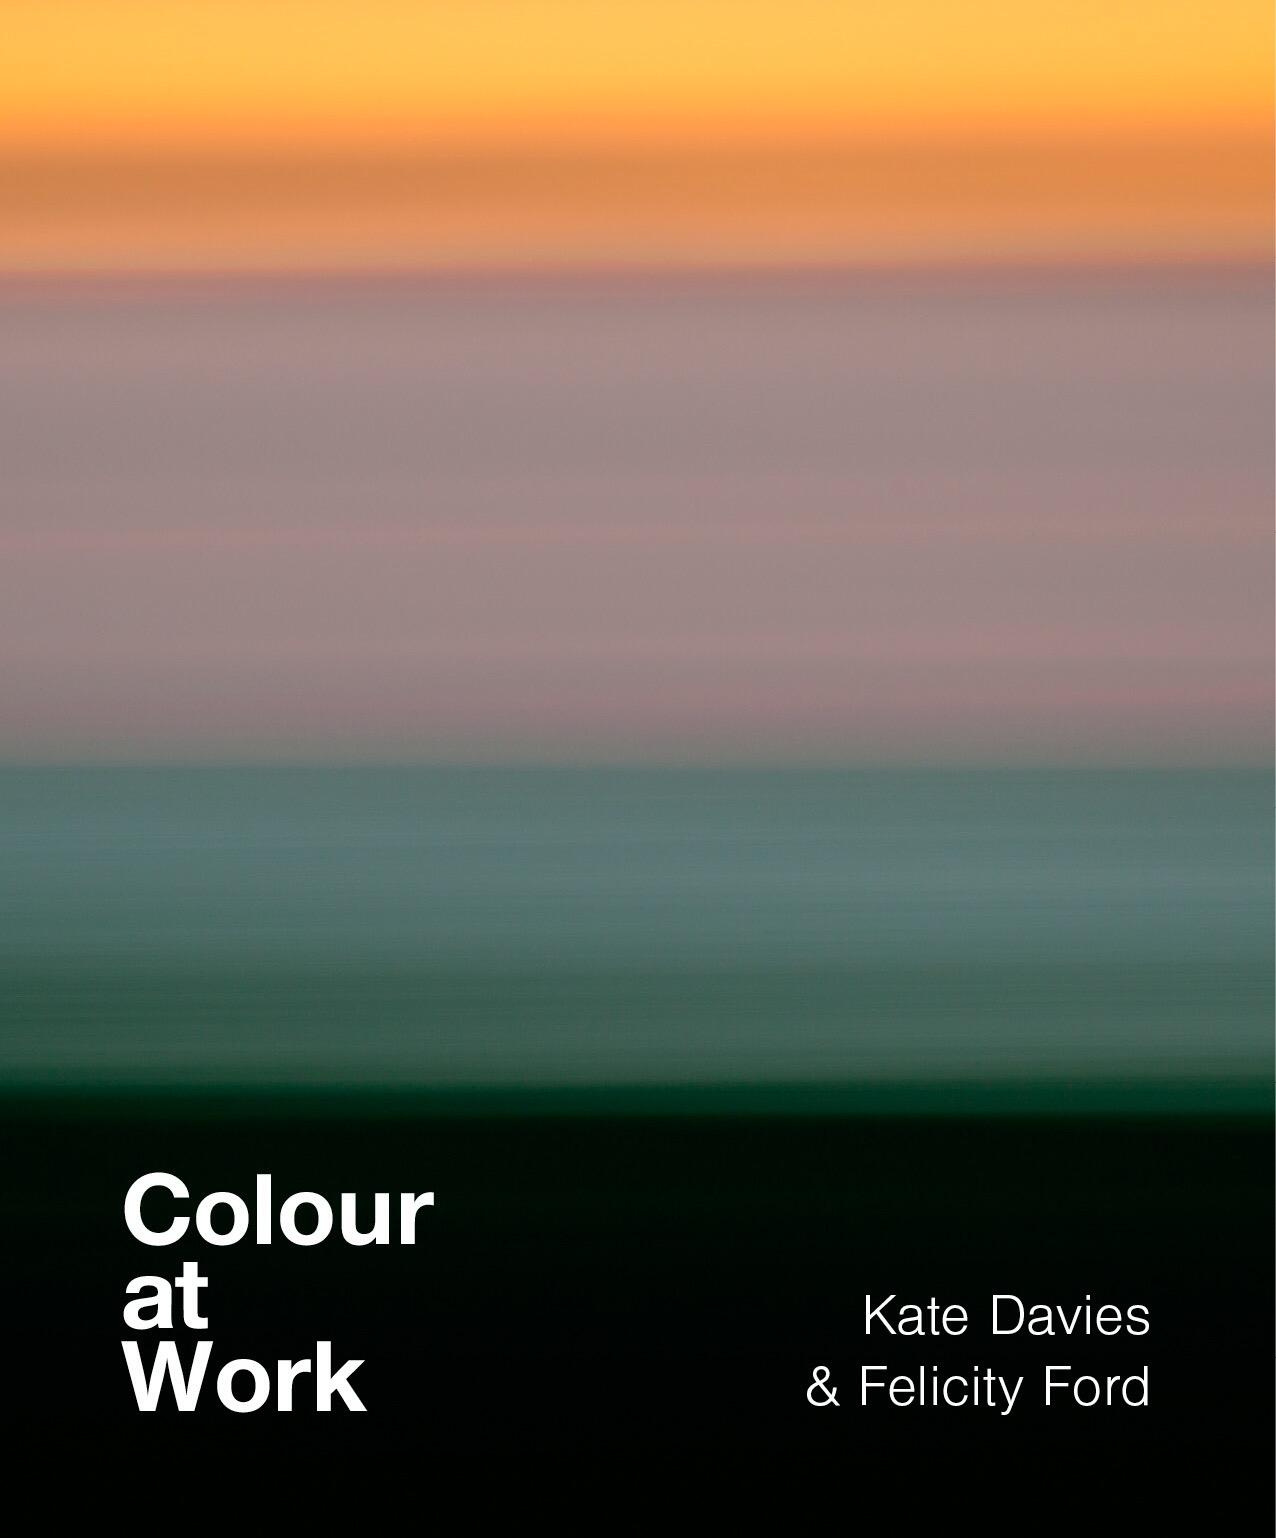 Colour at Work by Kate Davies and Felicity Ford